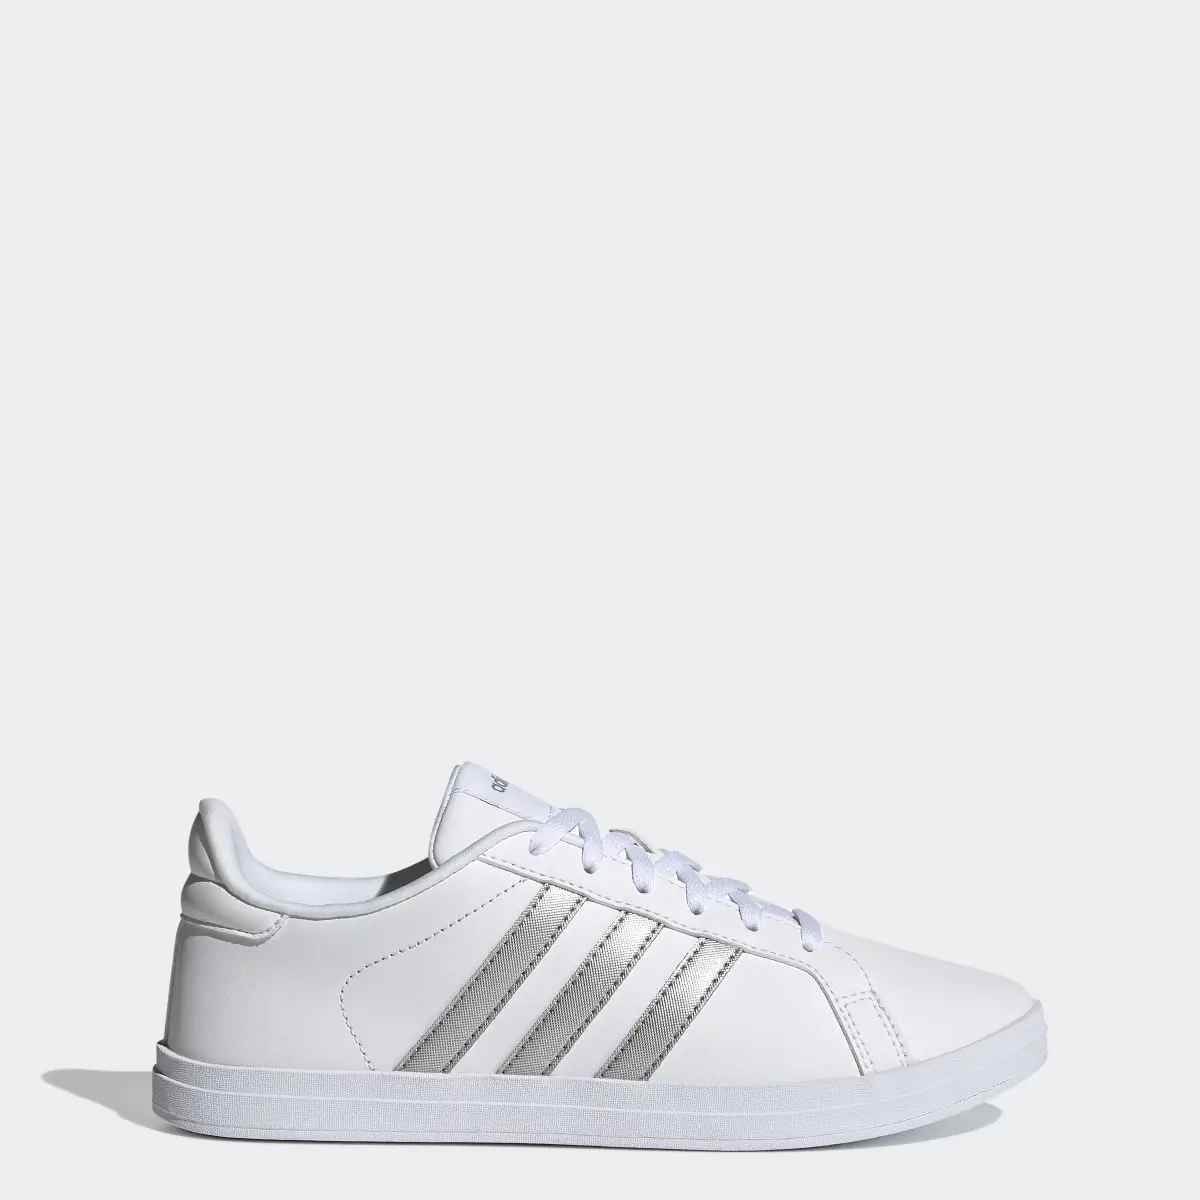 Adidas Courtpoint Shoes. 1